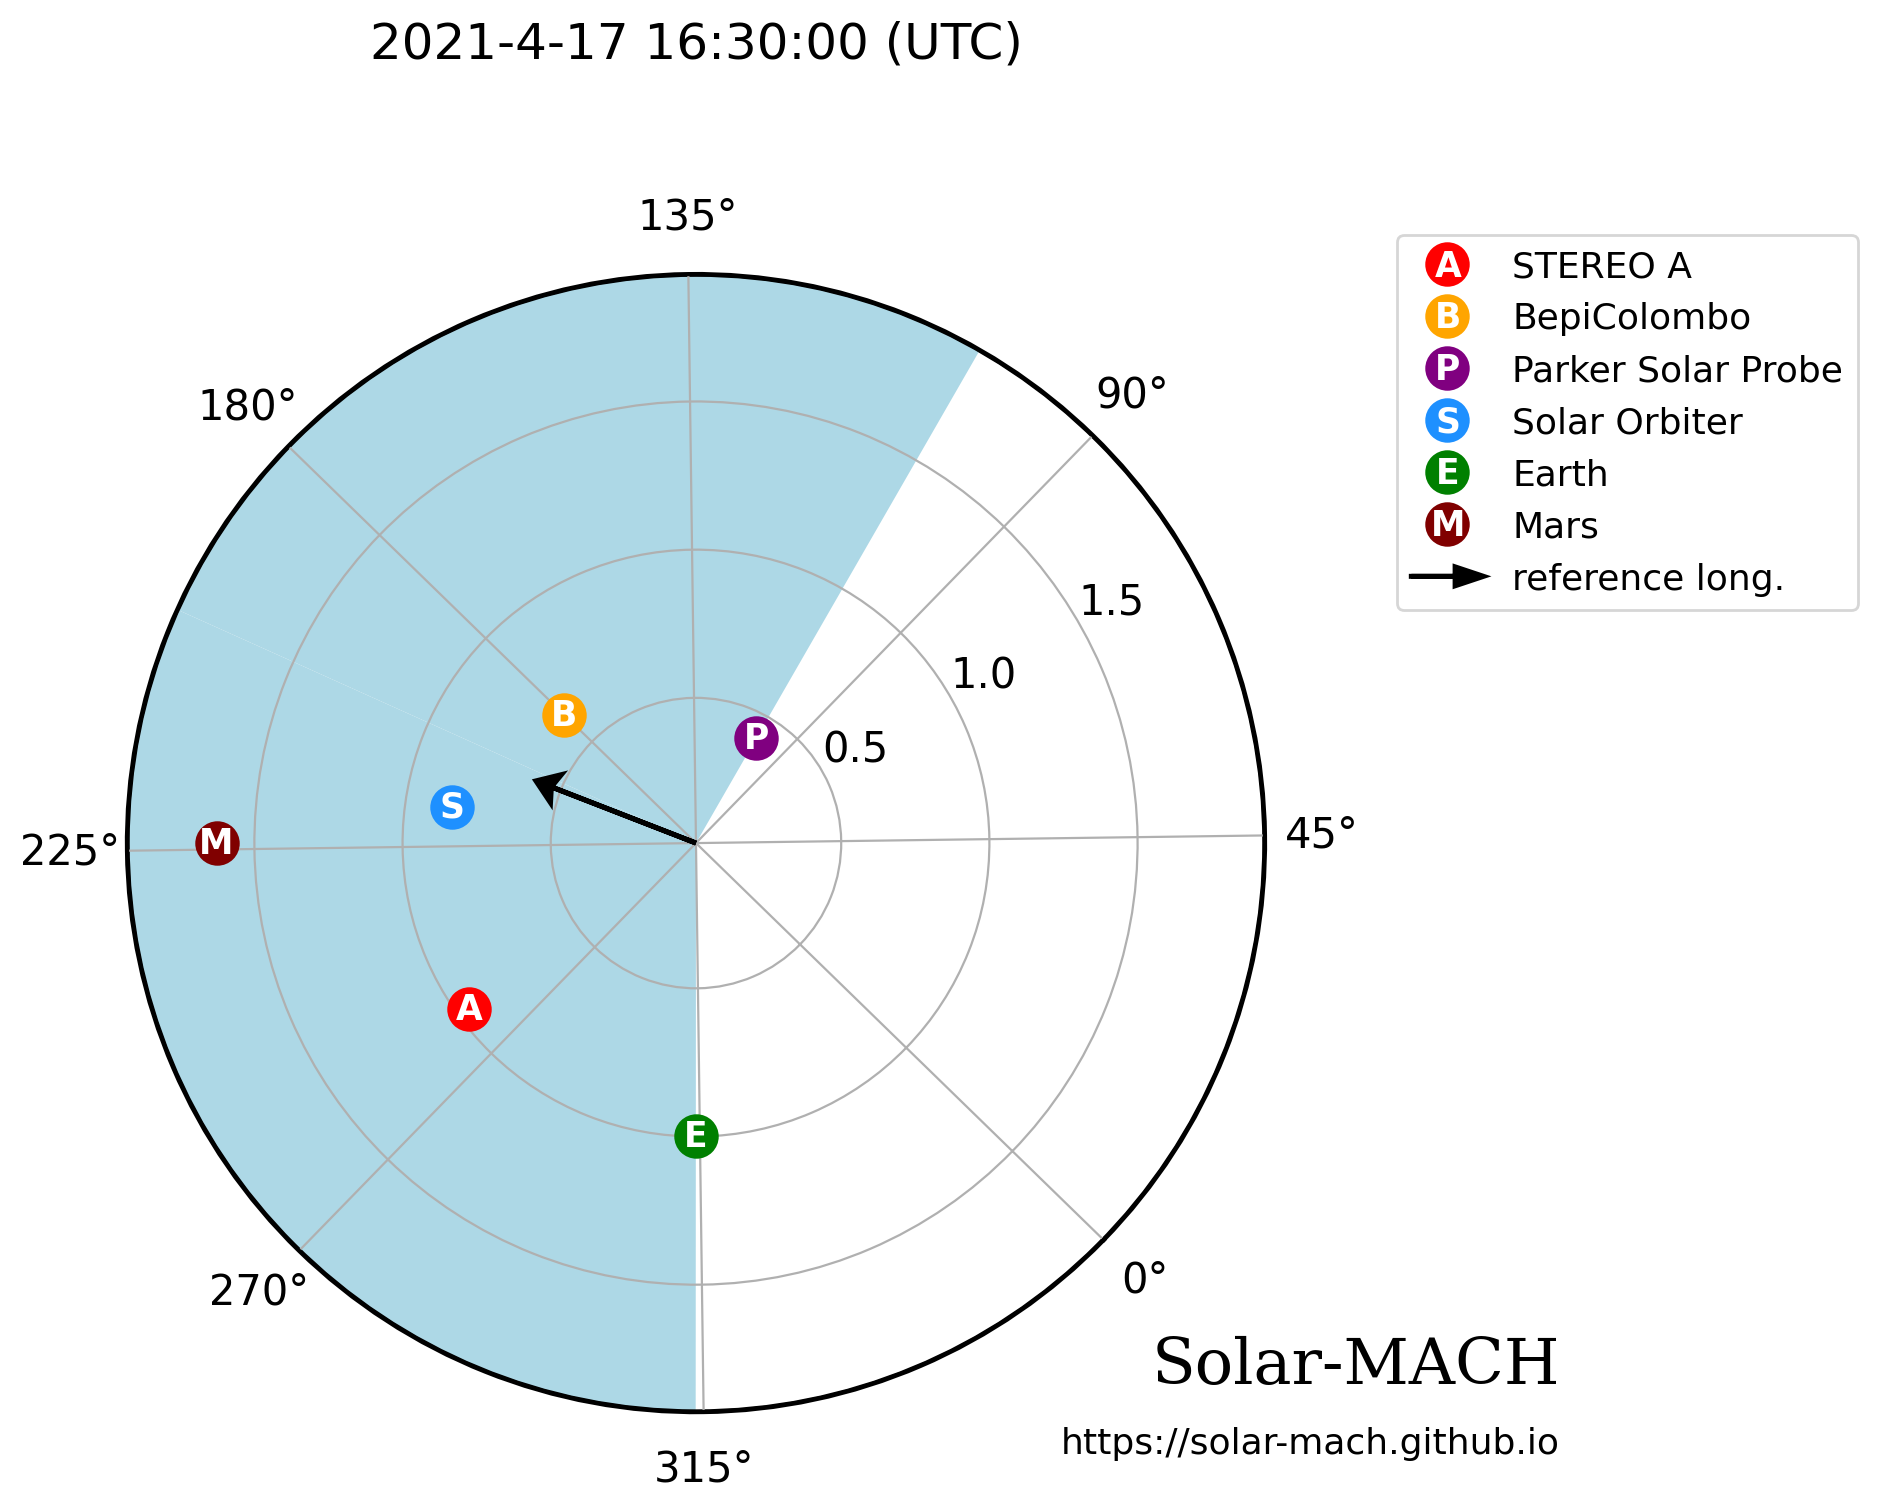 A diagram shows a circle representing the solar system with the Sun (not shown) in the center of the circle and gray lines radiating from the center to the edge of the circle. Degree labels, from 0 degrees to 315 degrees, appear at the end of the lines just outside the circle. The circle is shaded in blue from roughly 95 degrees to 315 degrees. In various places throughout the shaded area are dots representing STEREO A, BepiColombo, Parker Solar Probe, Solar Orbiter, Earth, and Mars. A short black arrow extends from the center of the circle toward the upper left, between BepiColombo and Solar Orbiter. At the top the text "2021-4-17 16:30:00 (UTC)" appears.